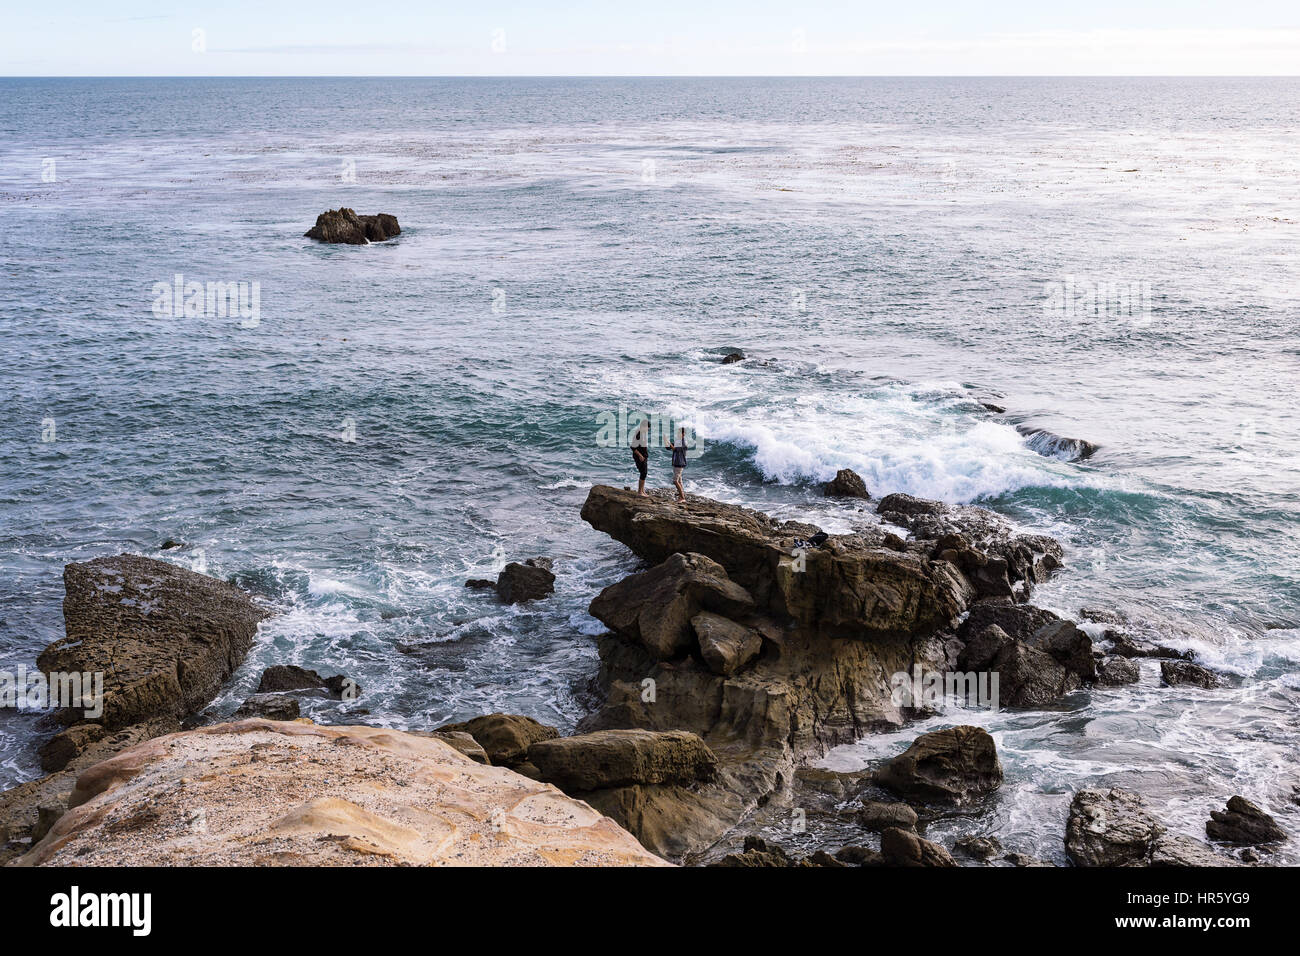 Two young men taking cell phone photos by the ocean in Laguna Beach, California Stock Photo